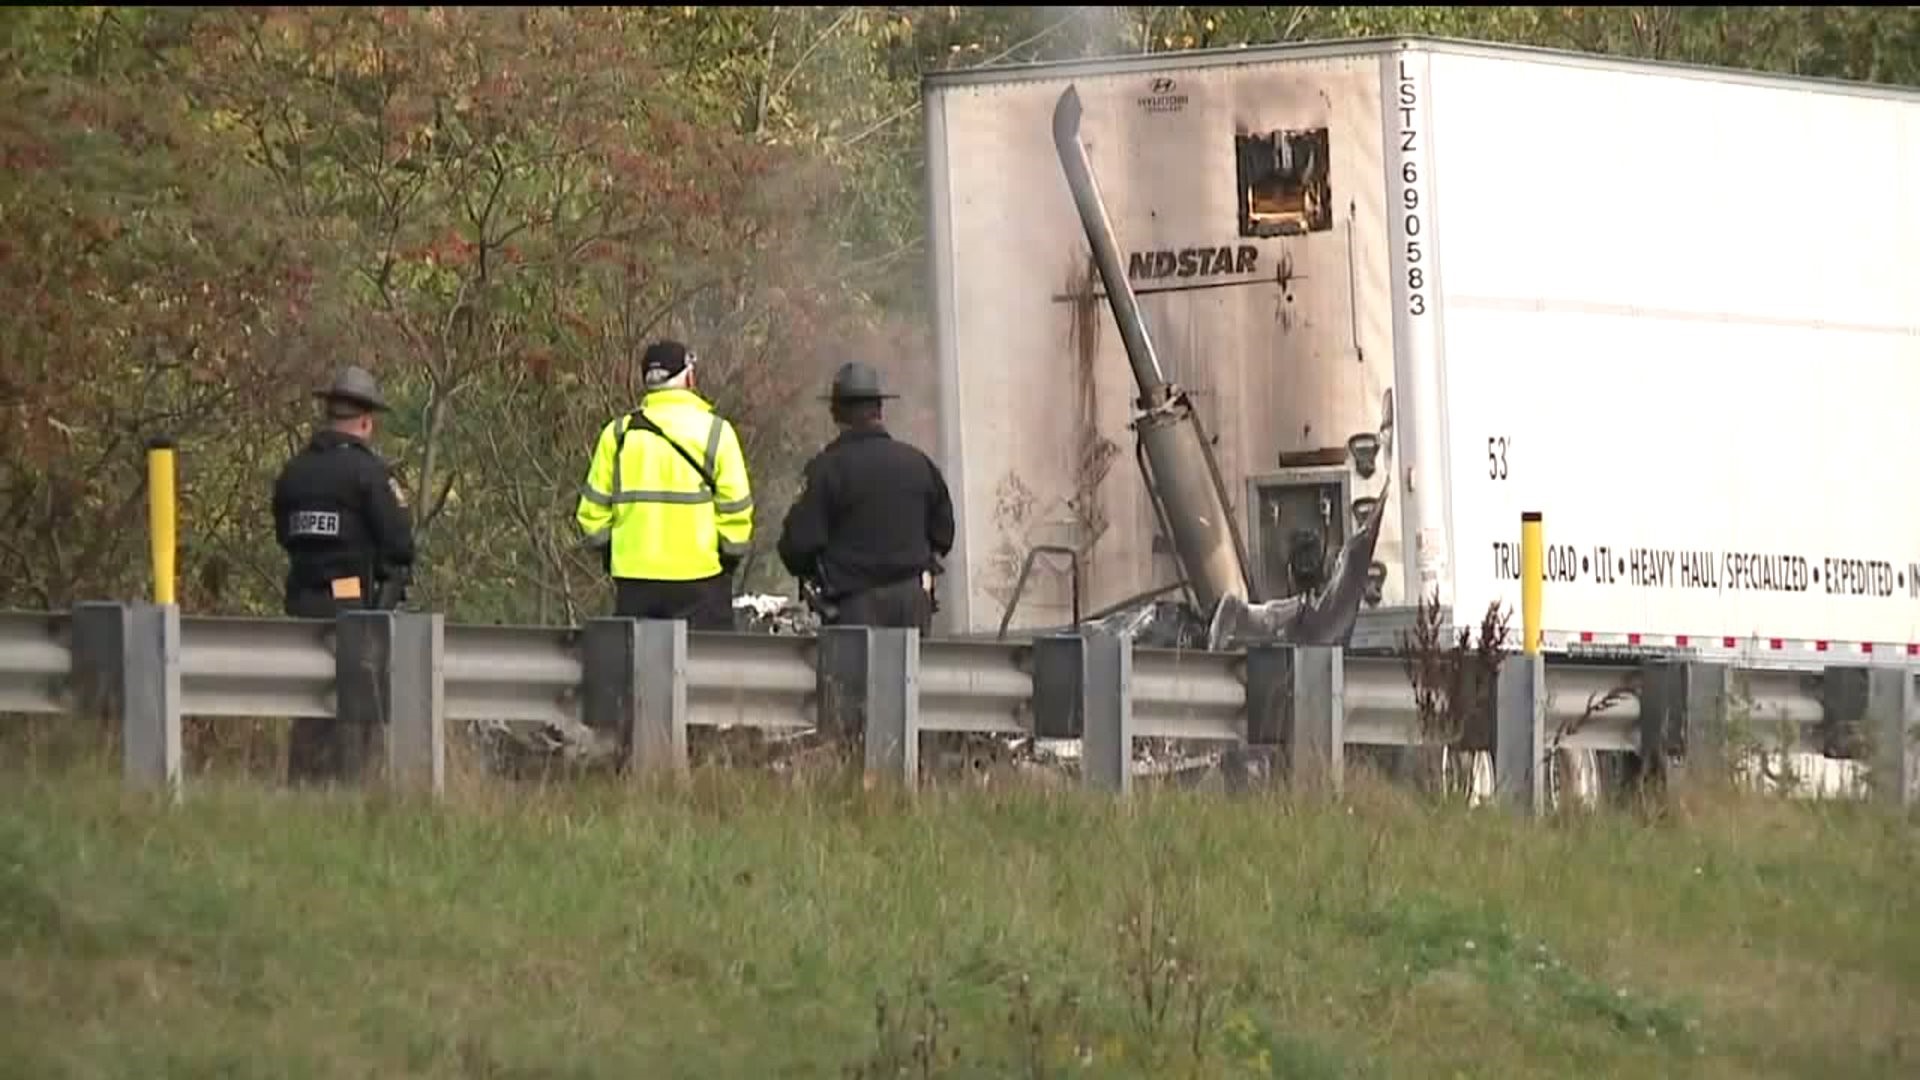 Tractor Trailer Fire on Interstate 81 in Susquehanna County